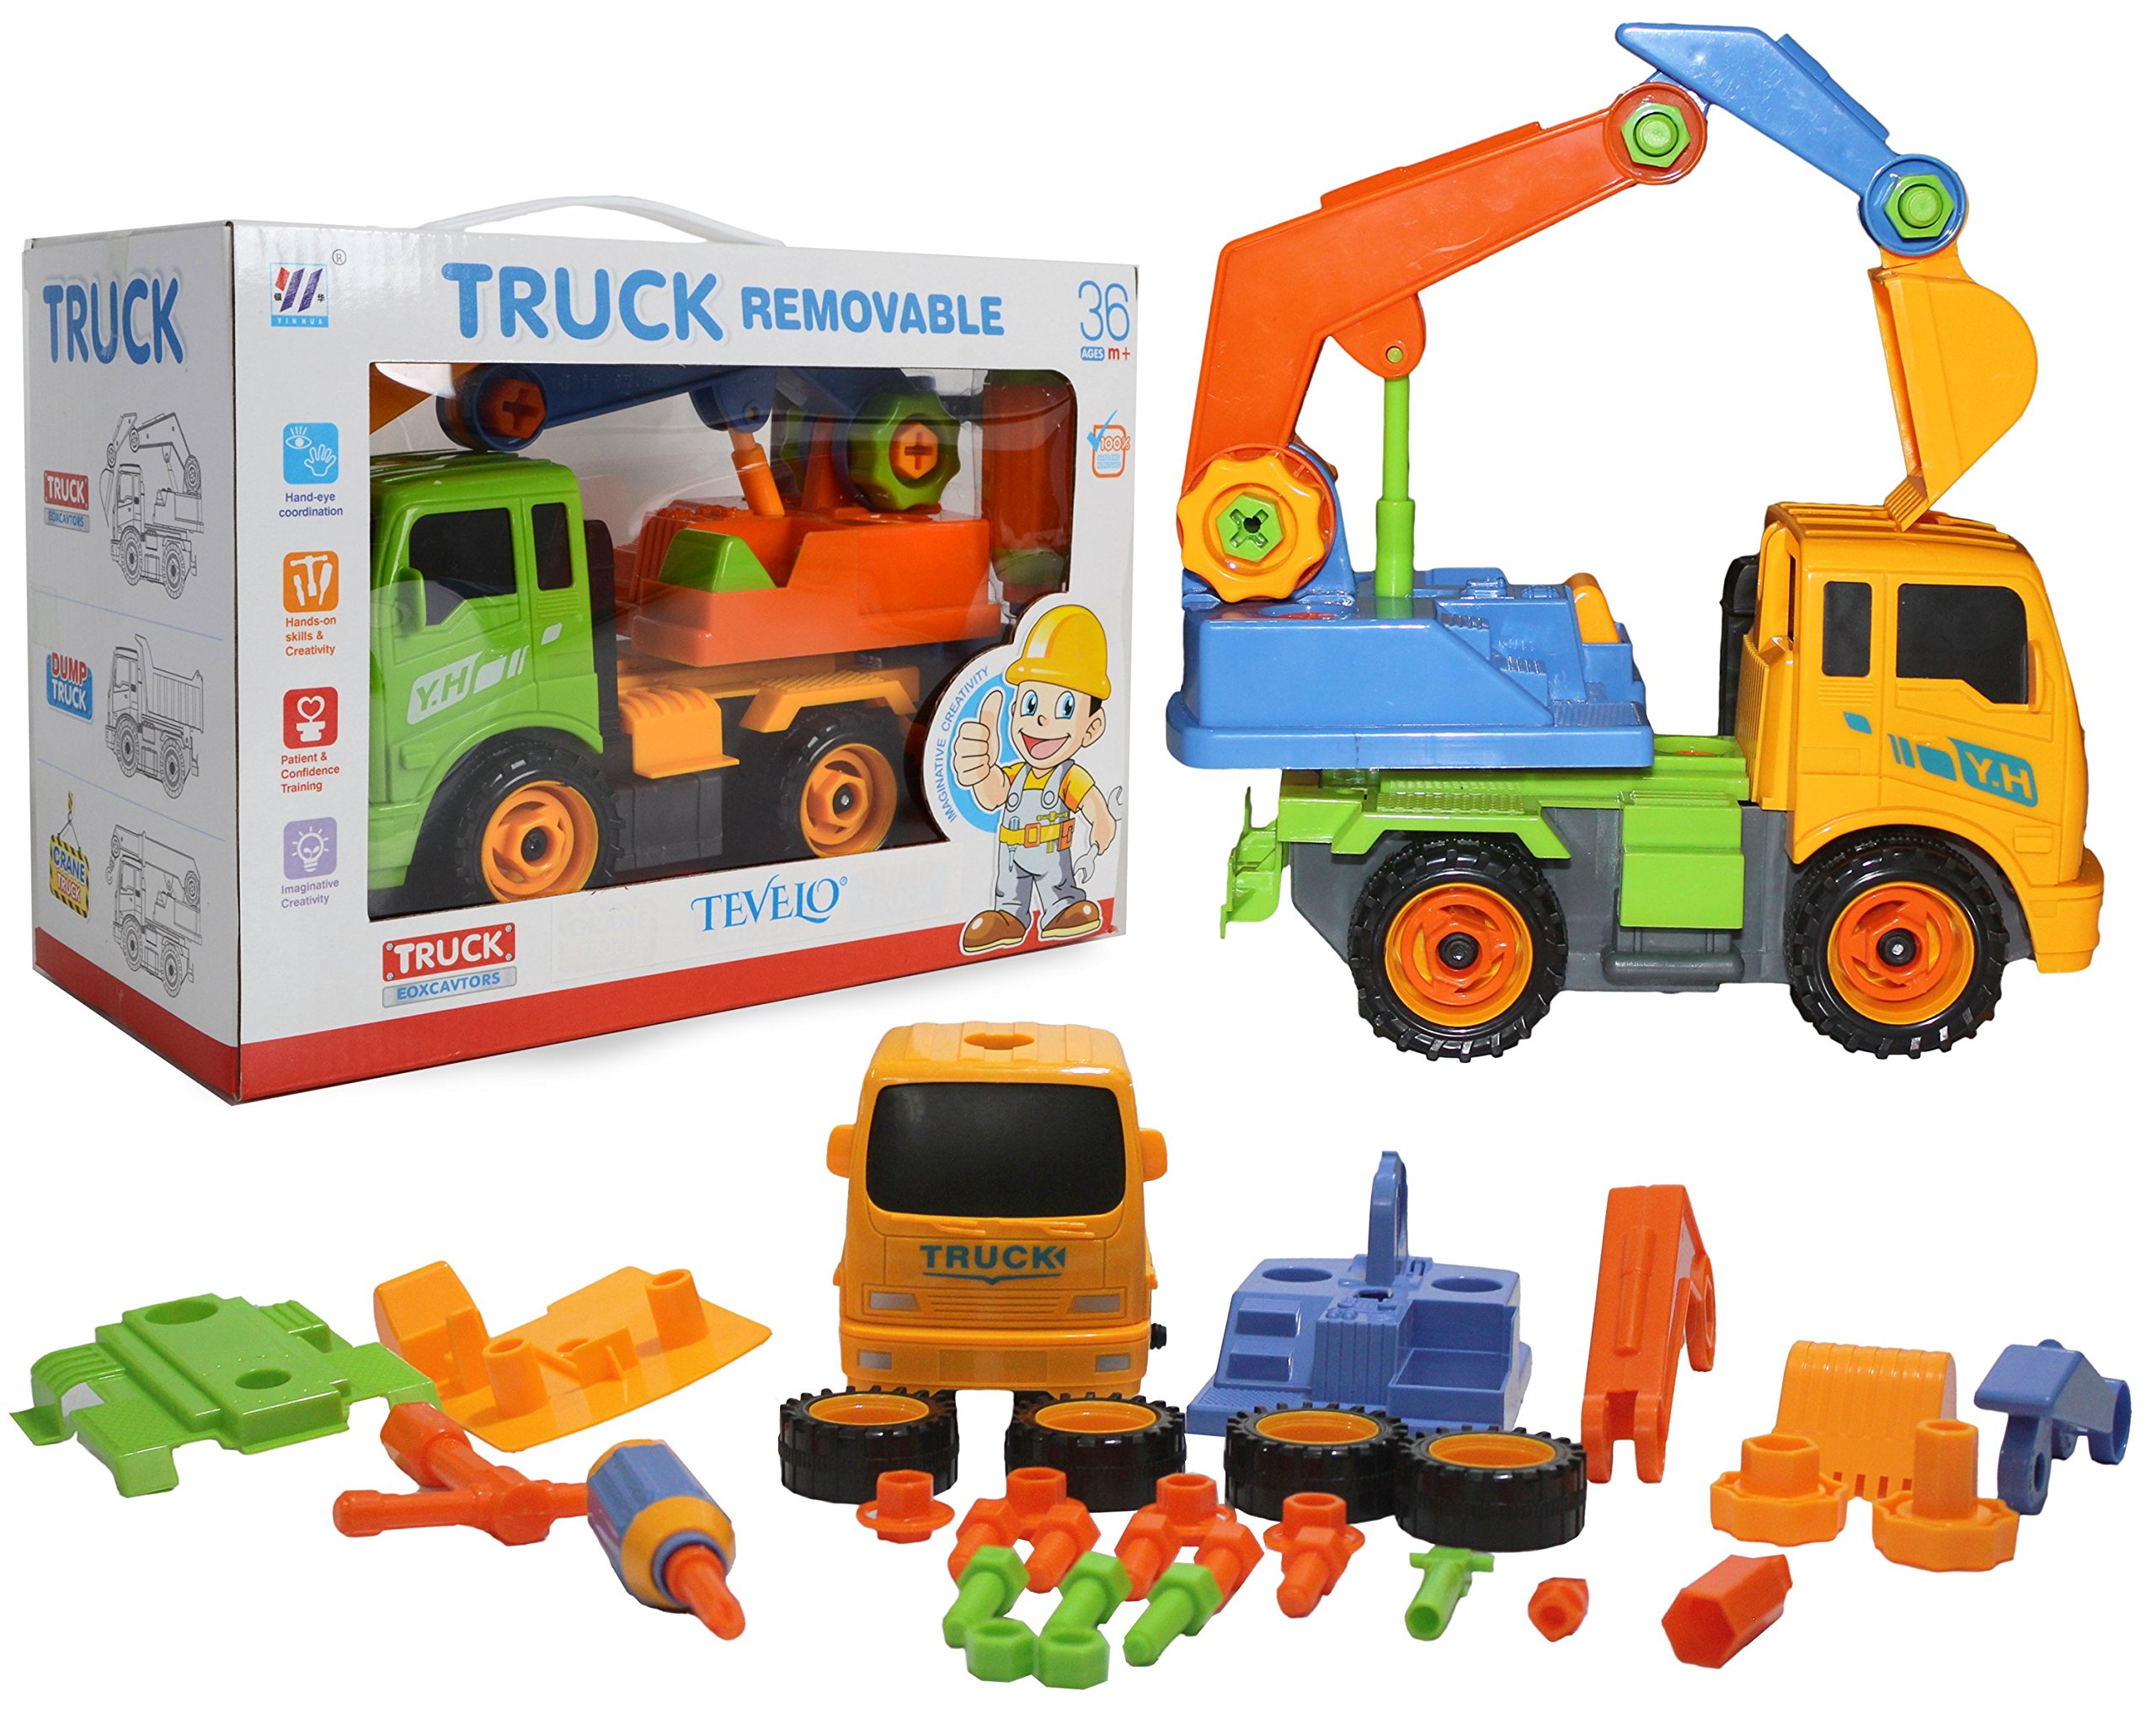 Take A Part Excavator 2-toys-in-1 DIY Construction Truck Toy, Tevelo ...